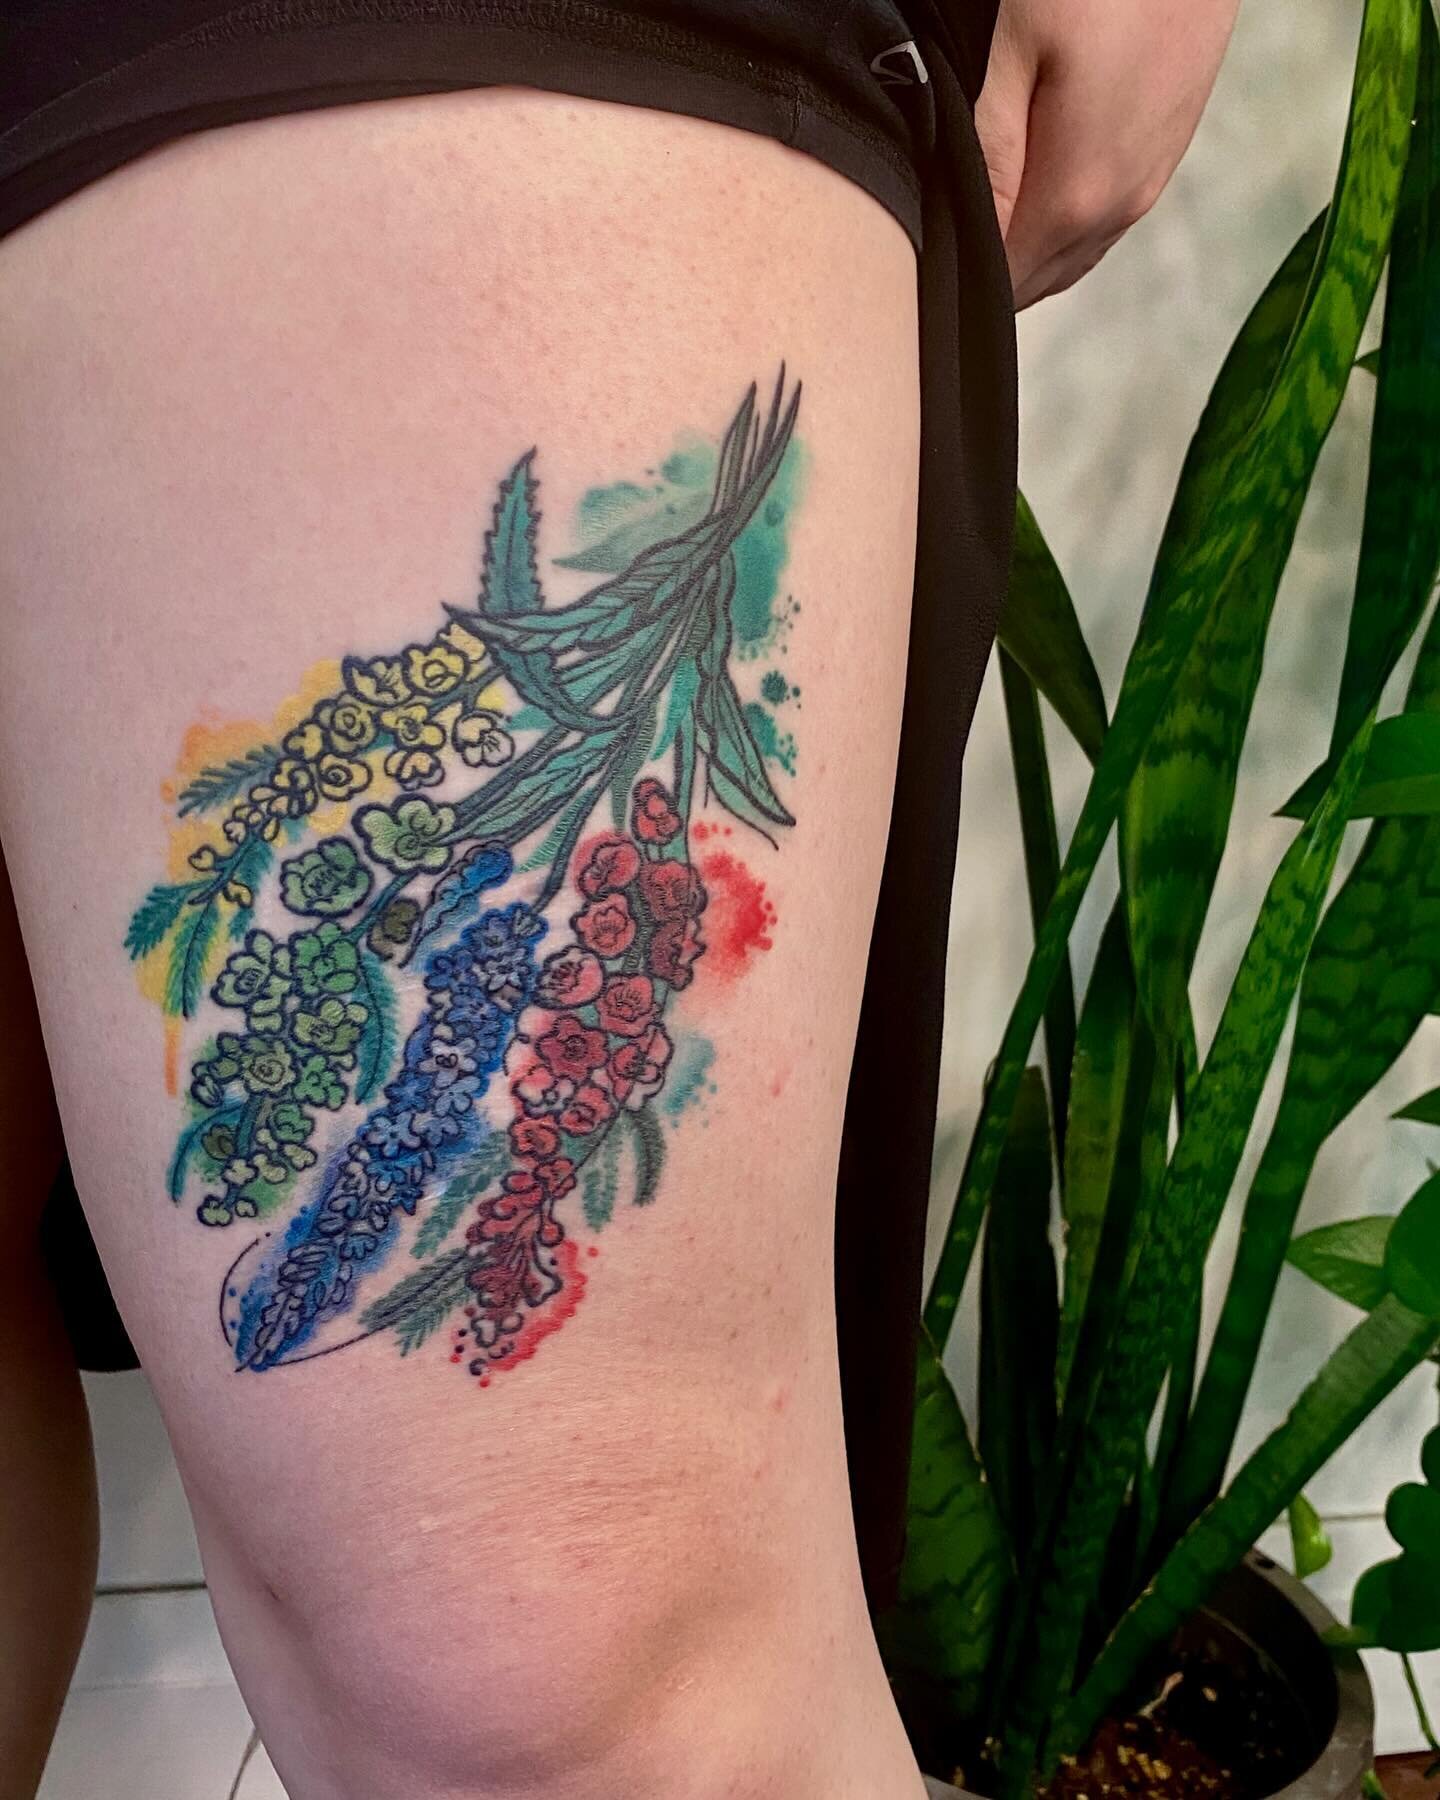 💛💚💙❤️Got a healed photo of this really fun tattoo I did for Michelle in November, an absolute pleasure 🌟 (minor line work touch up on the blue flower is fresh in the photo)